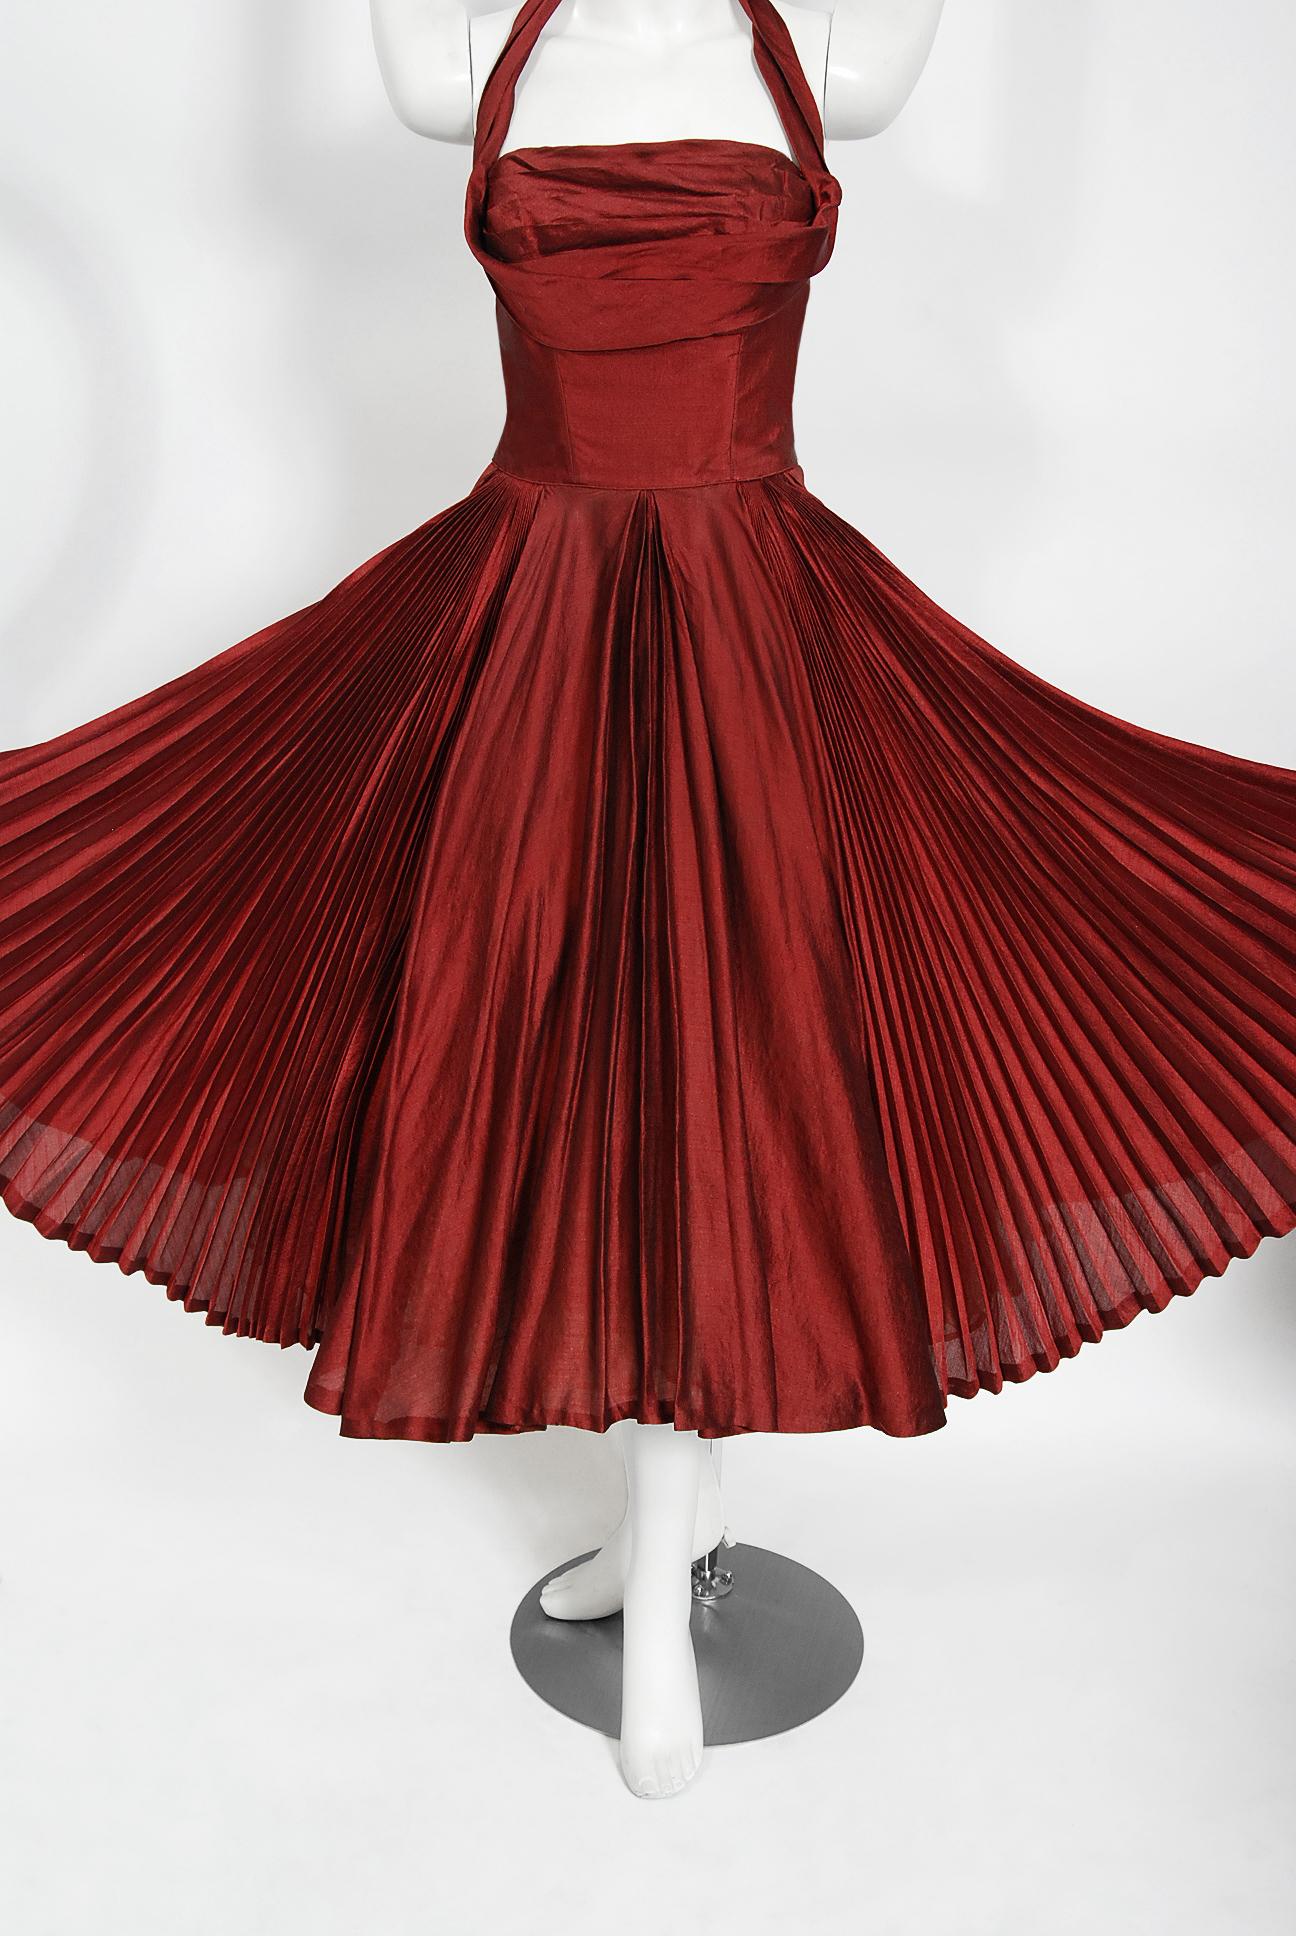 A magnificent 1950's creation by the iconic dress designer Fred Perlberg.  This gorgeous garment is fashioned from  light-weight shimmering silk organza in the most spectacular merlot red color. The bodice is an alluring low-cut halter with the